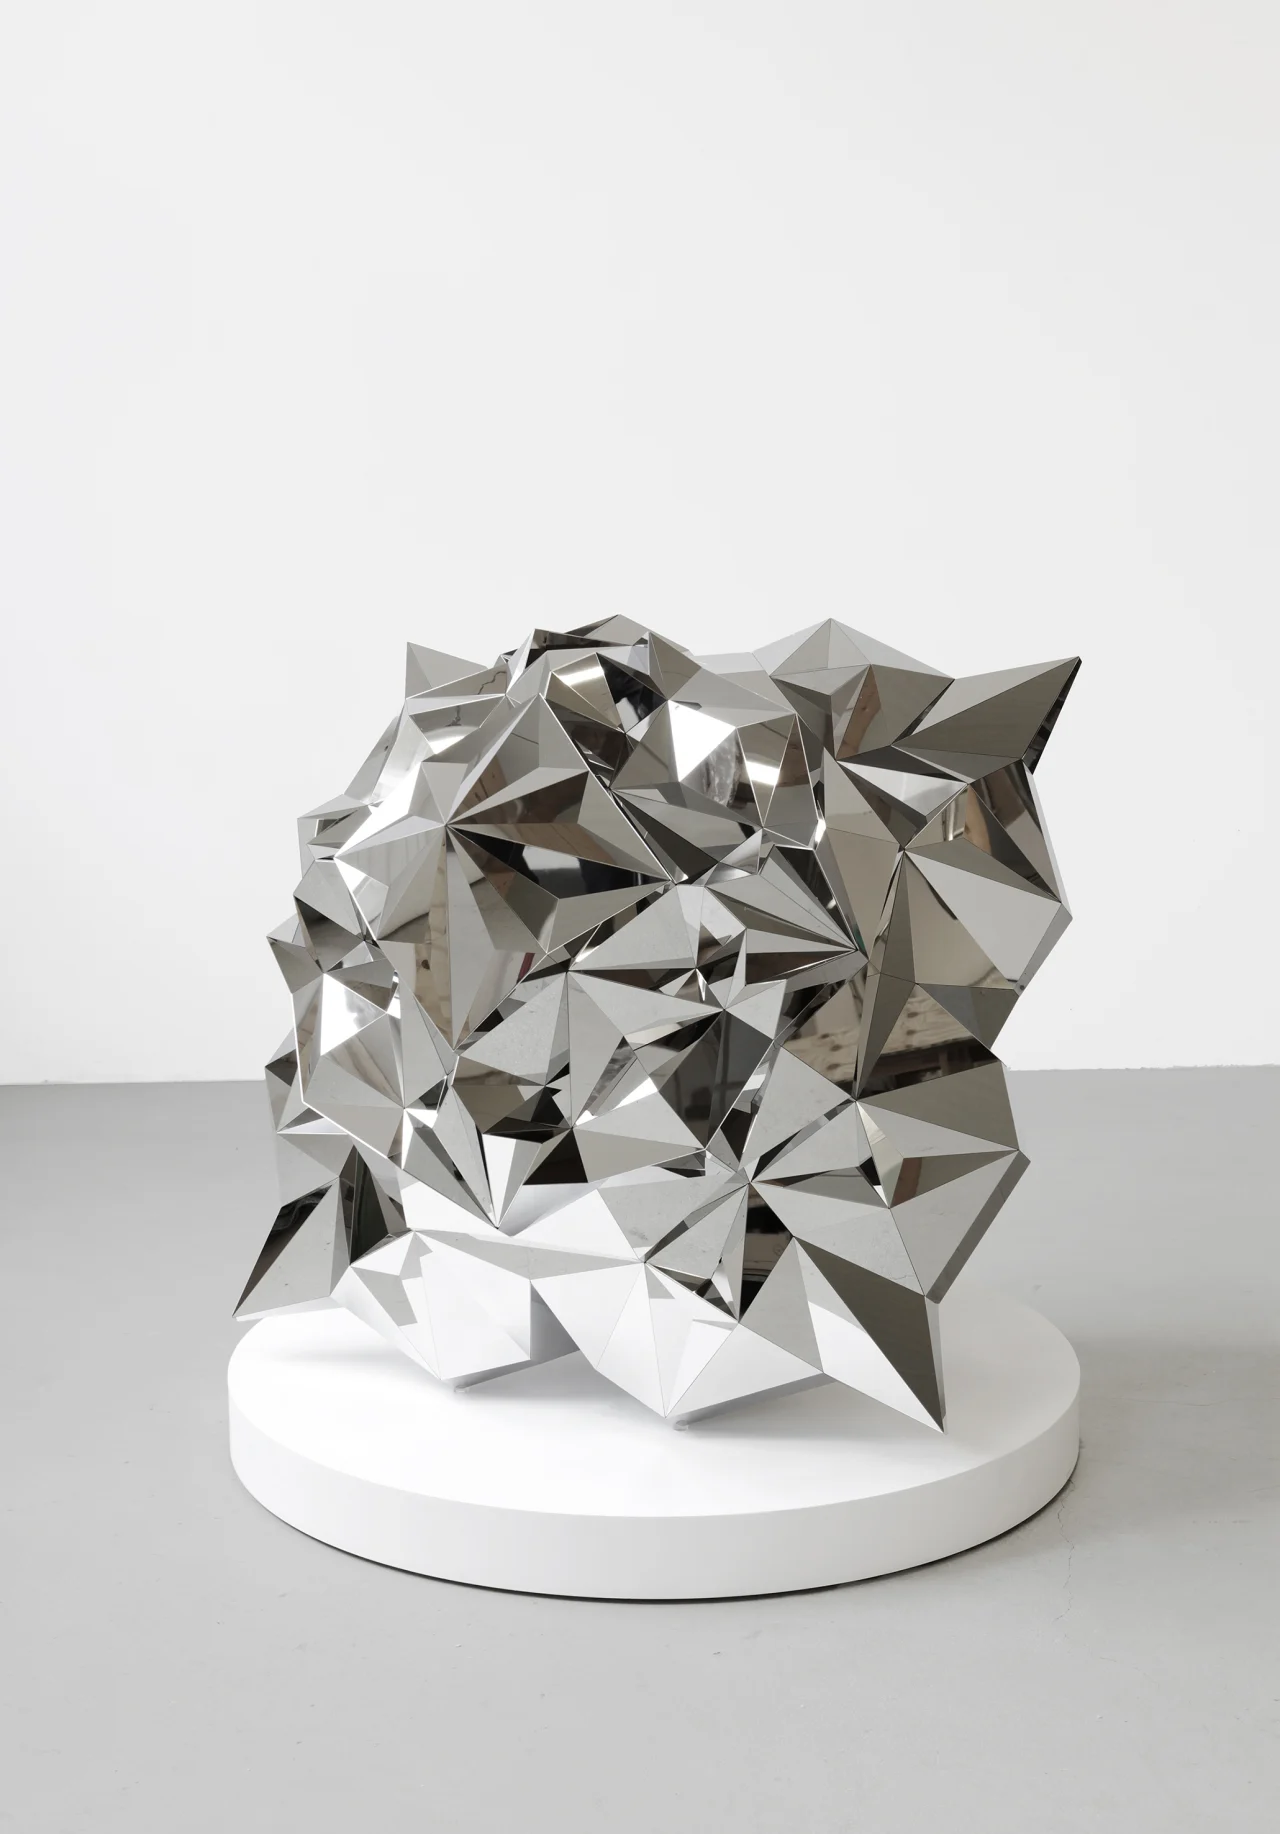 Timo Nasseri: Radiance #1, 2022; High polished stainless steel